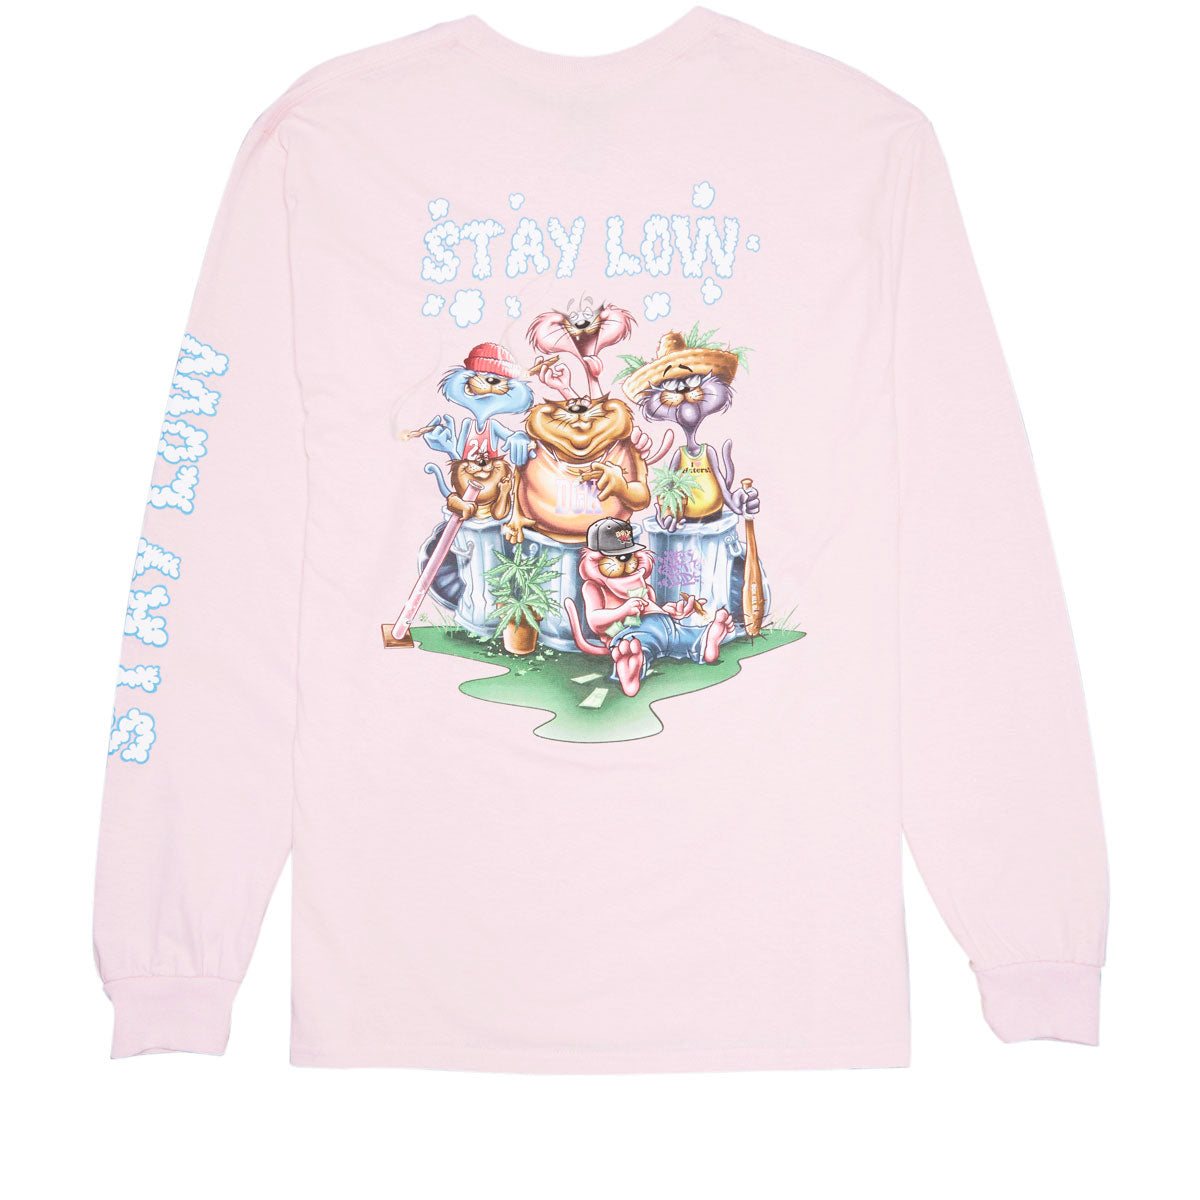 DGK Stay Low Long Sleeve T-Shirt - Pink image 1